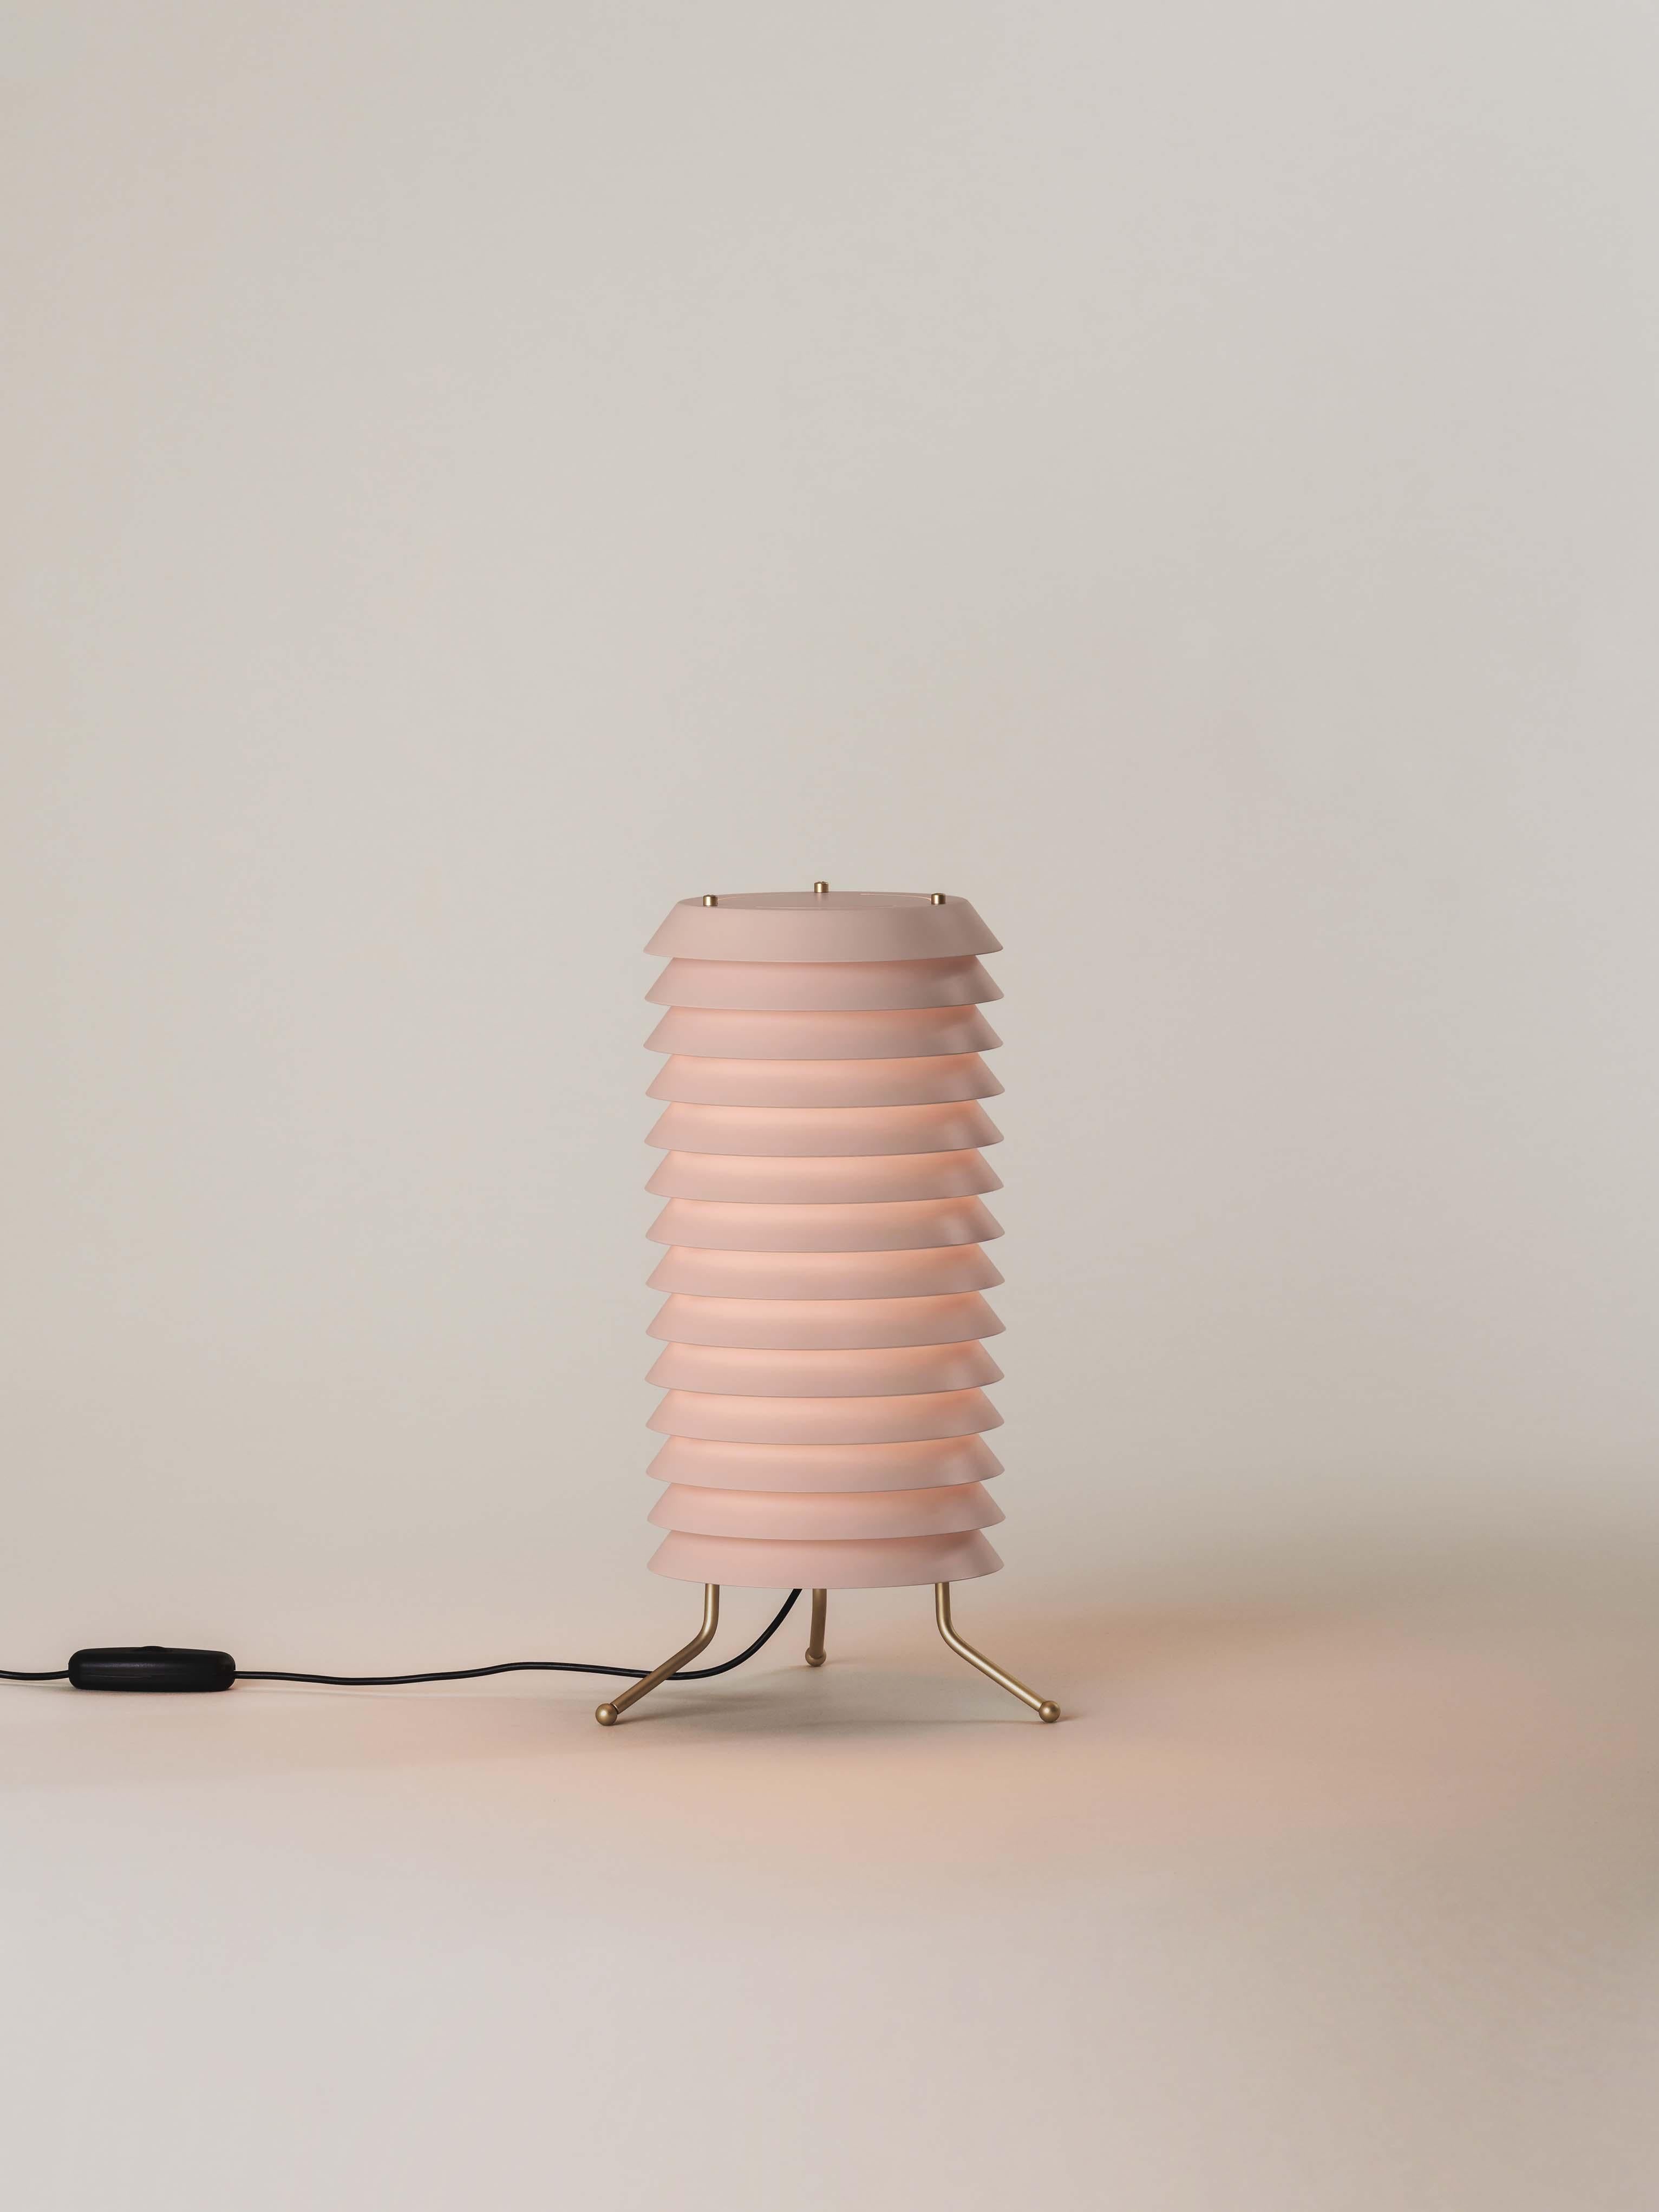 Rose Maija table lamp by Ilmari Tapiovaara
Dimensions: D 18 x H 33 cm
Materials: Brass, plastic.
Available in white or nude rose.

Maija conveys the feeling of light typical of Baltic cities, where the streets are barely illuminated, apart from